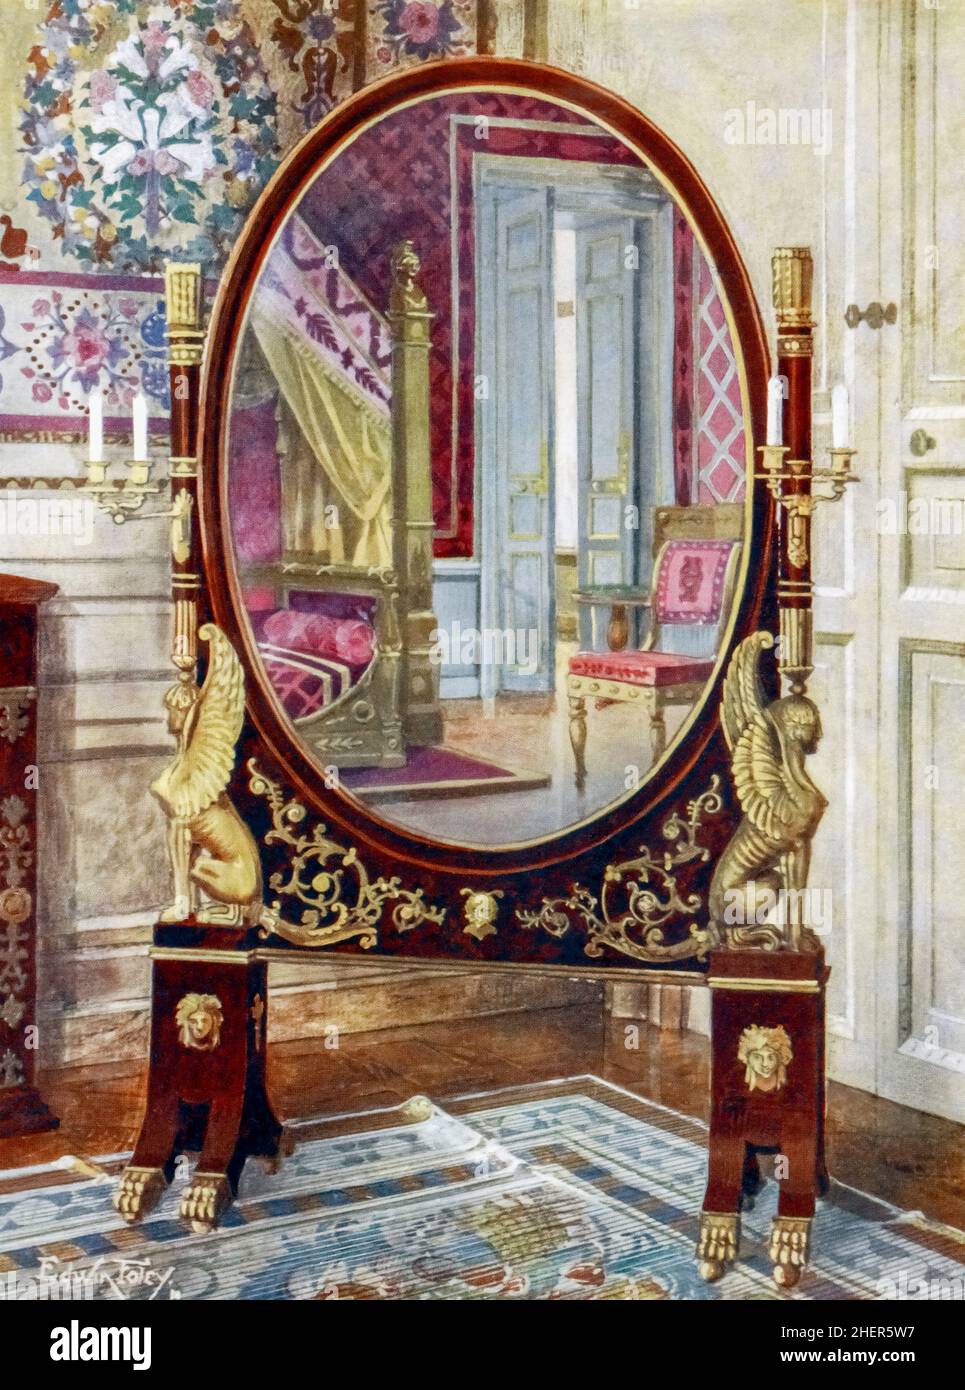 Psyche and bed of Napoleon the First in the Chateau de Compiegne, France, in the style of the First Empire.  From The Book of Decorative Furniture: Its Form, Colour, & History, Volume One, by Edwin Foley, publiished London 1910.  A psyche is the dressing mirror as seen in the picture. Stock Photo